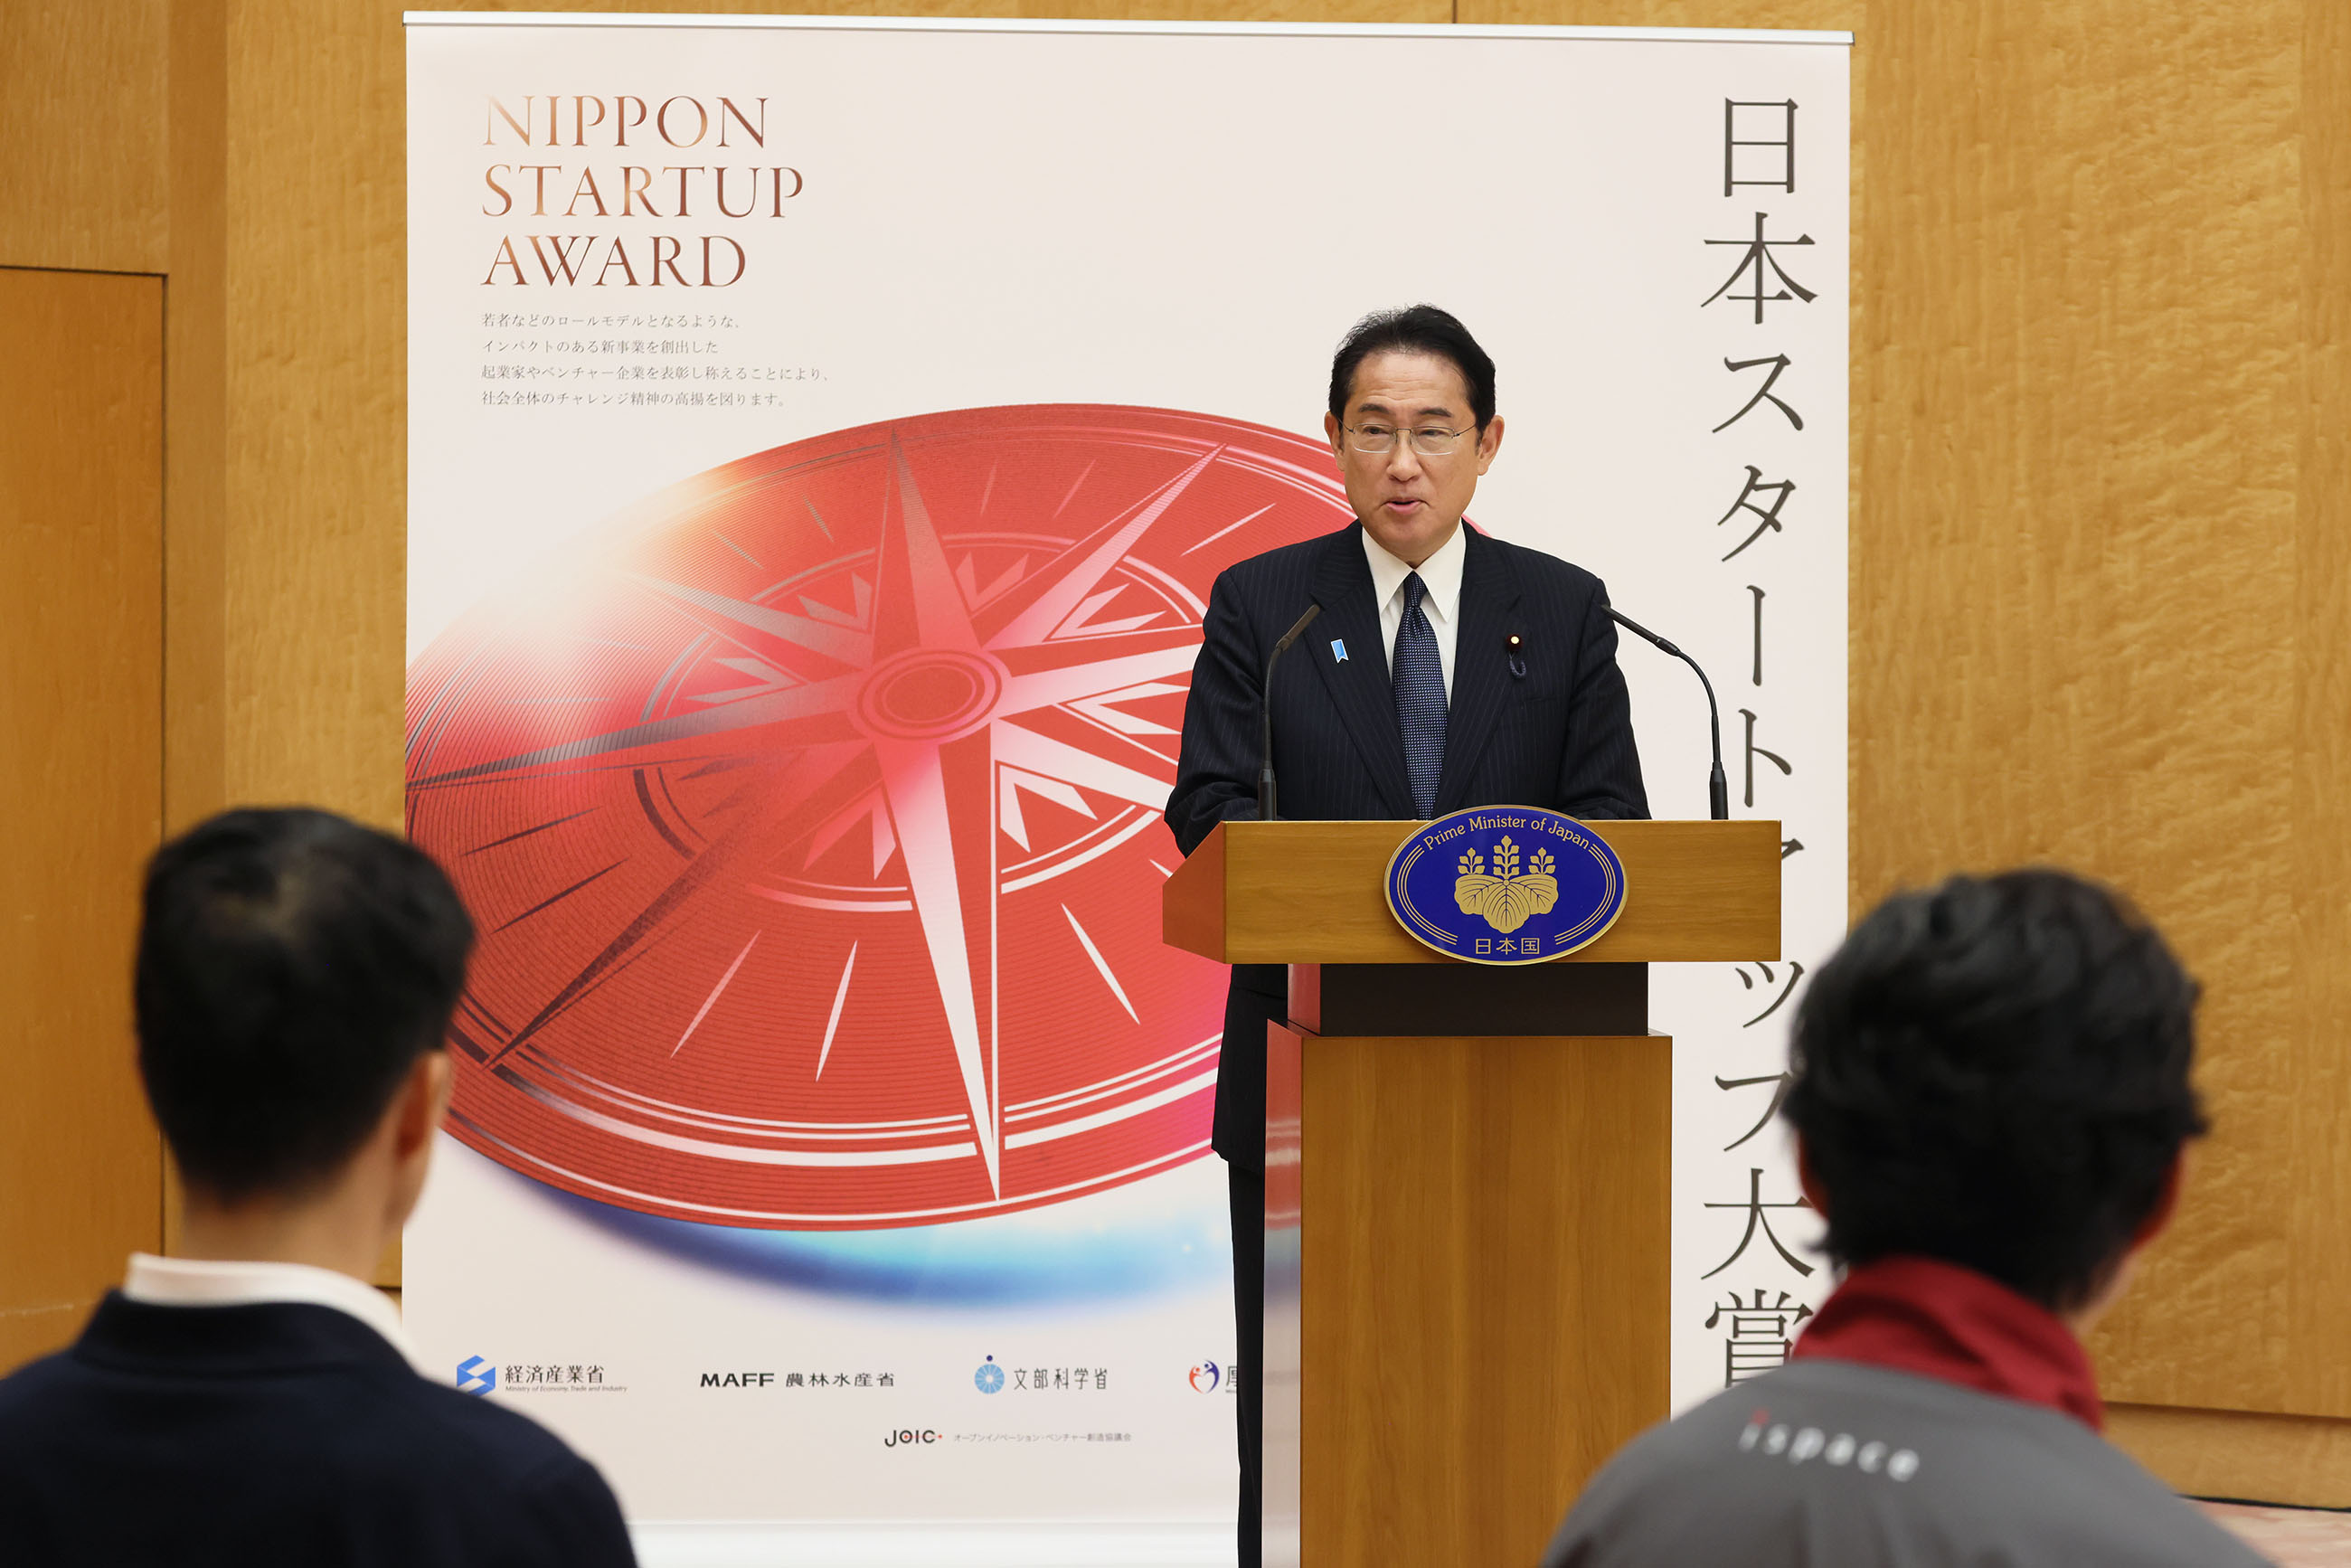 Awards Ceremony for the Nippon Startup Award 2023